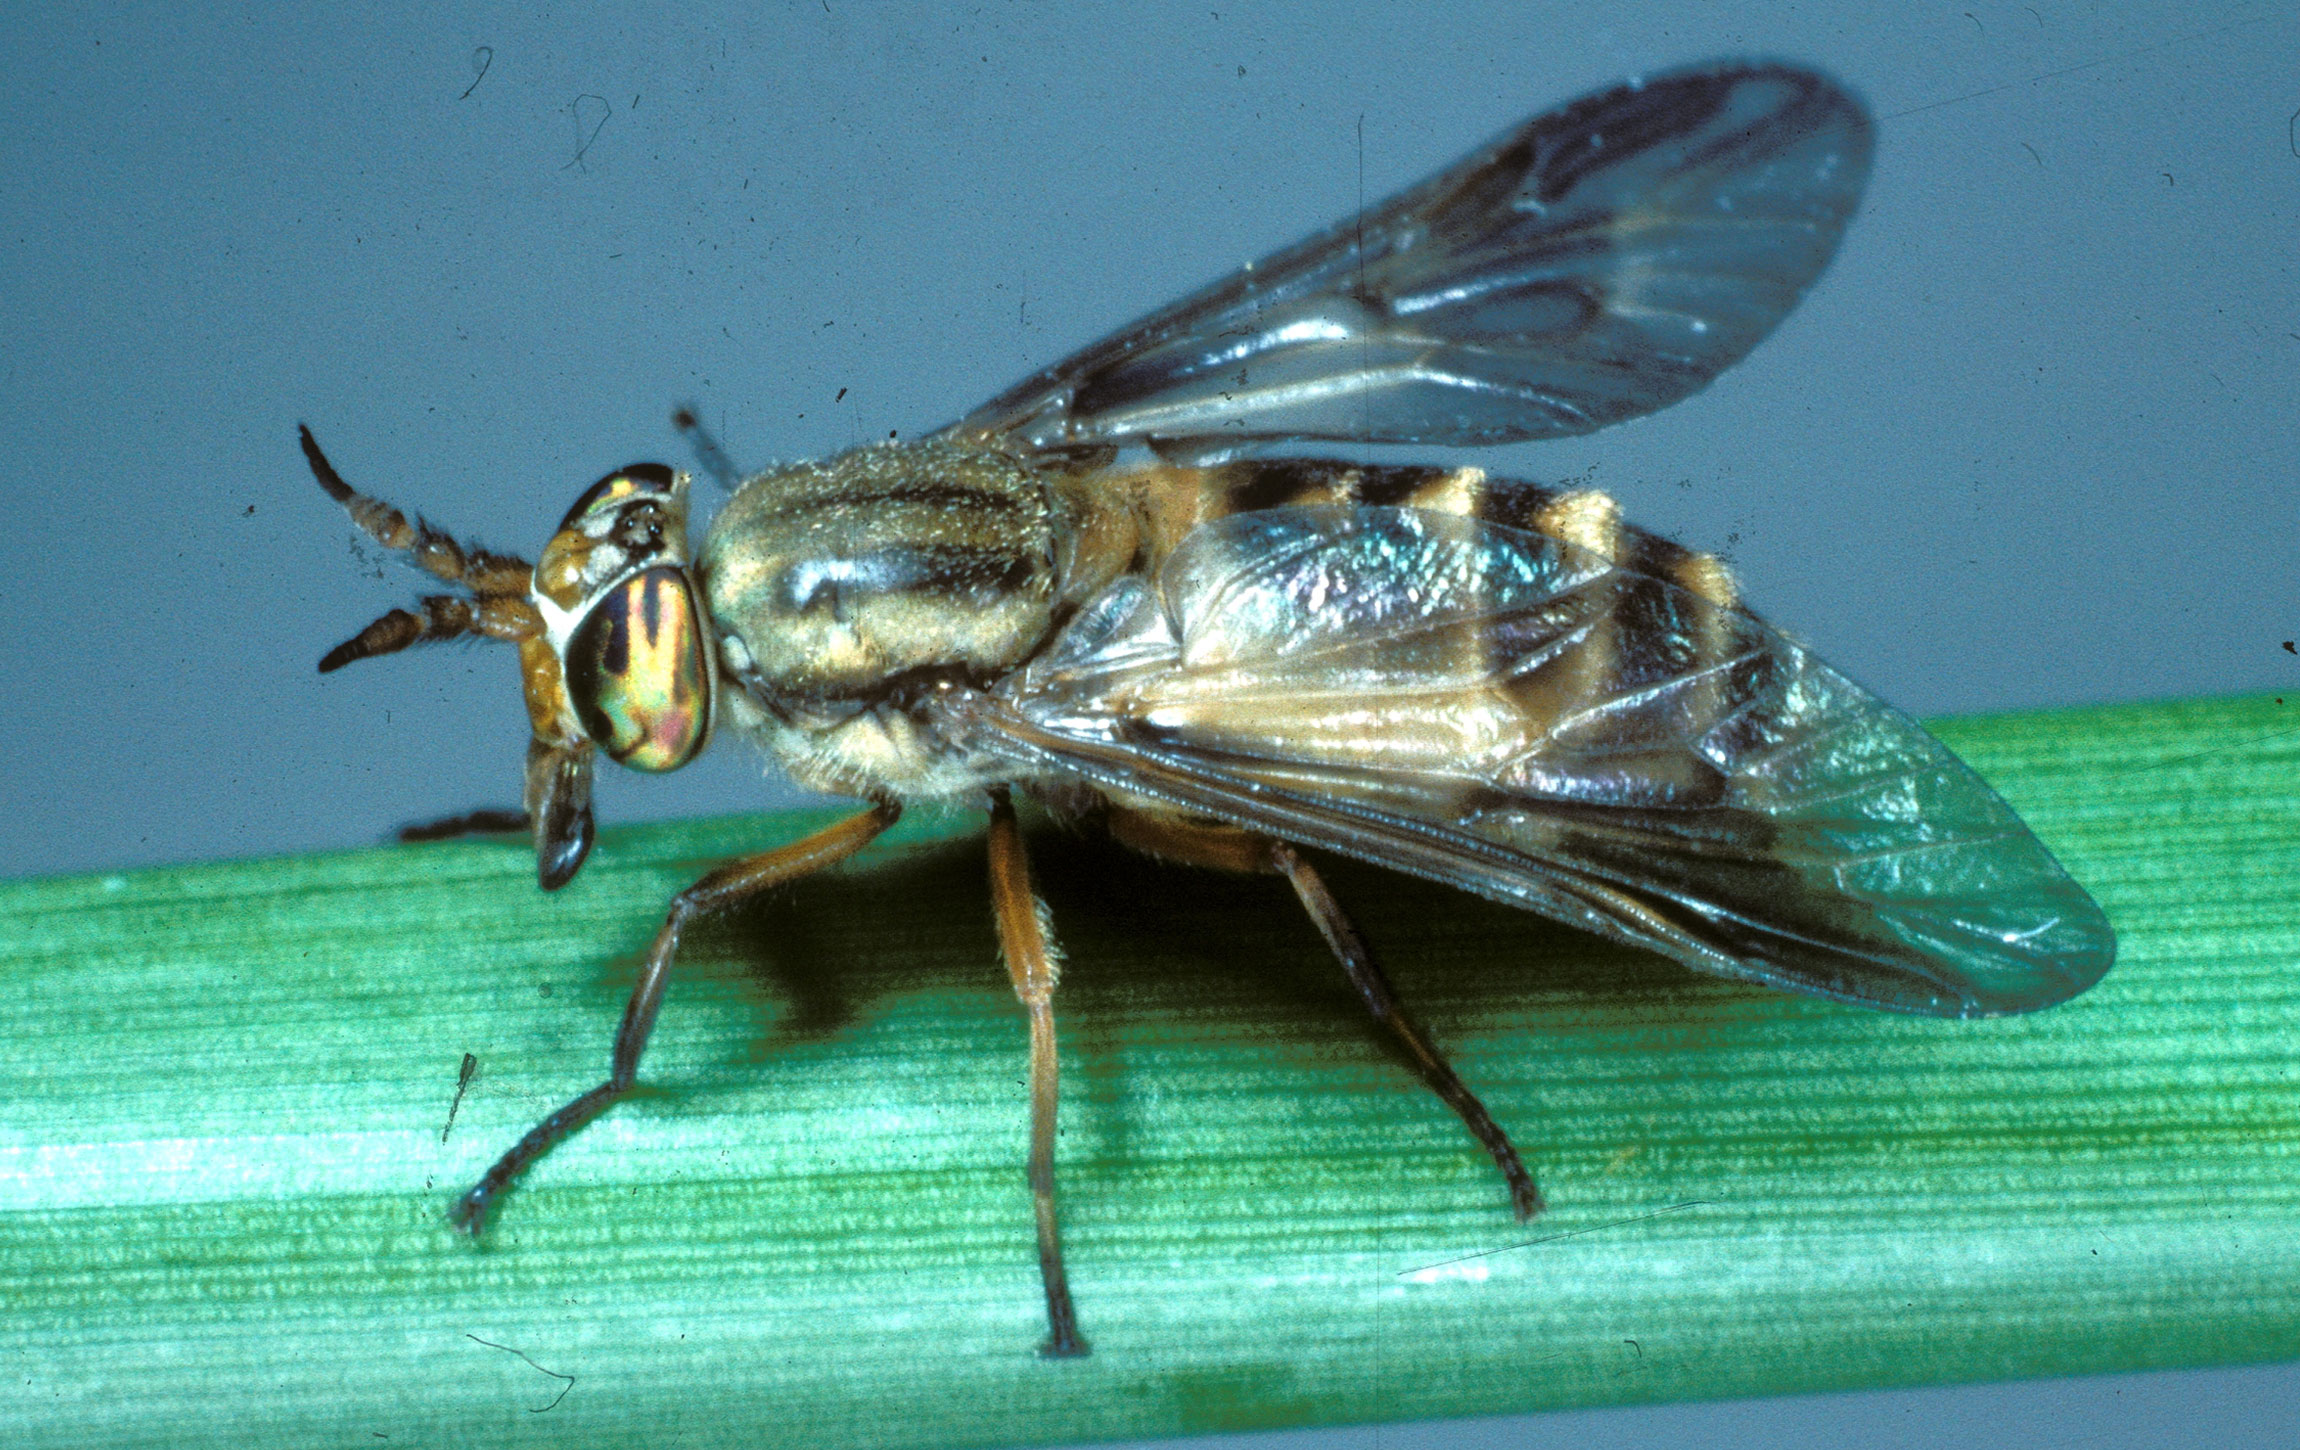 Fly with a yellow and black patterned body and dark colored wings on a green blade of grass.